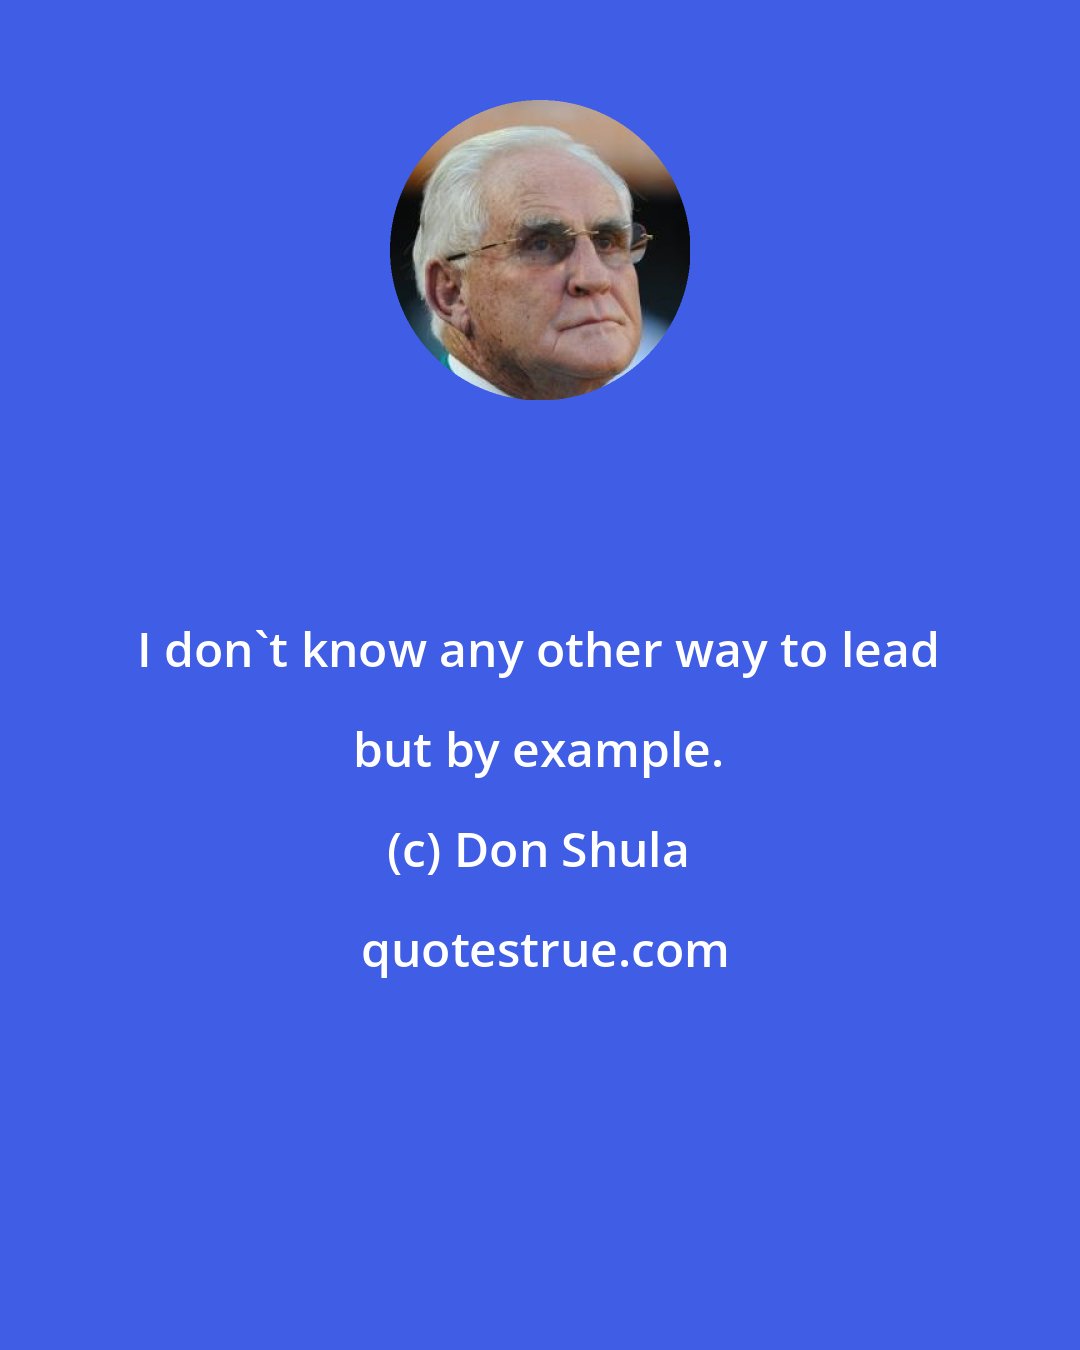 Don Shula: I don't know any other way to lead but by example.